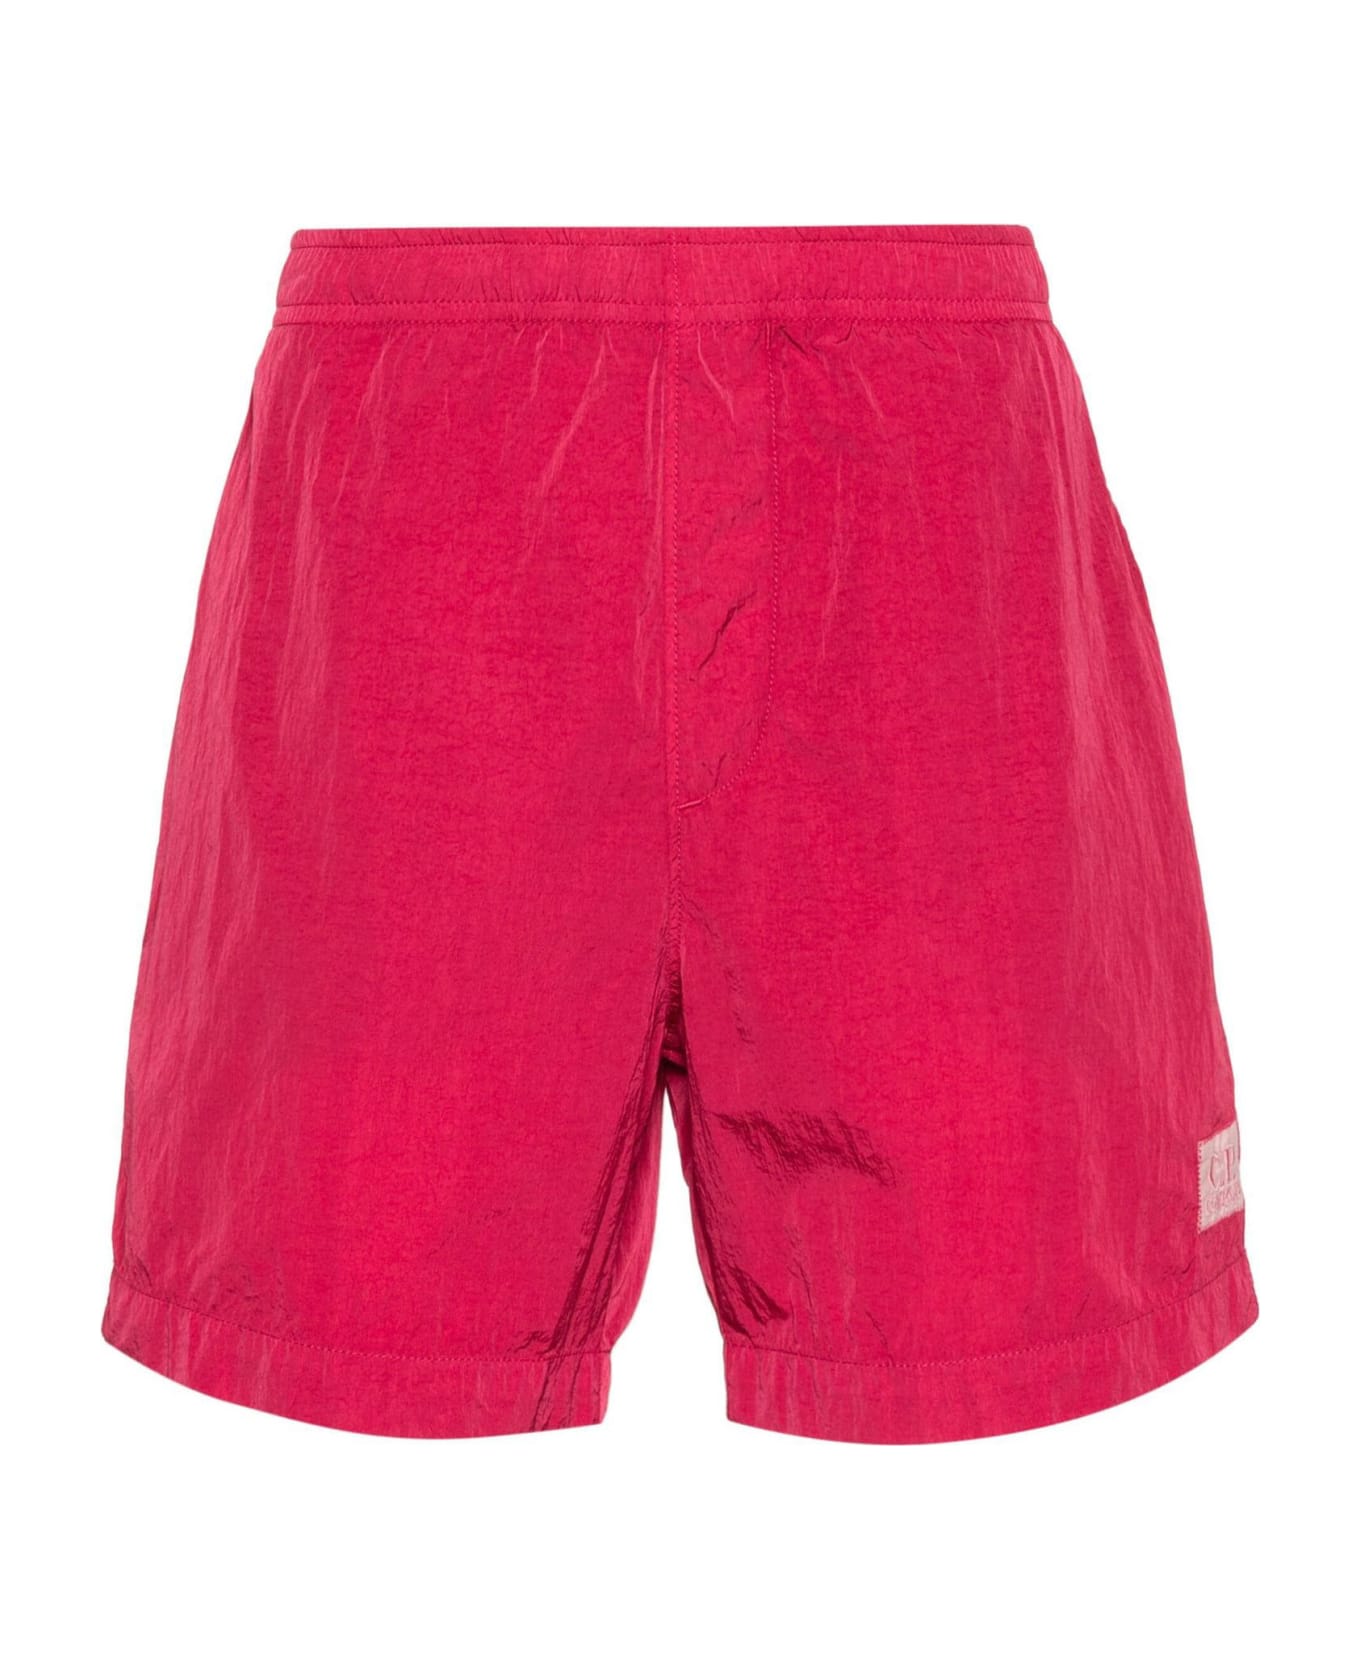 C.P. Company C.p.company Sea Clothing Red - Red